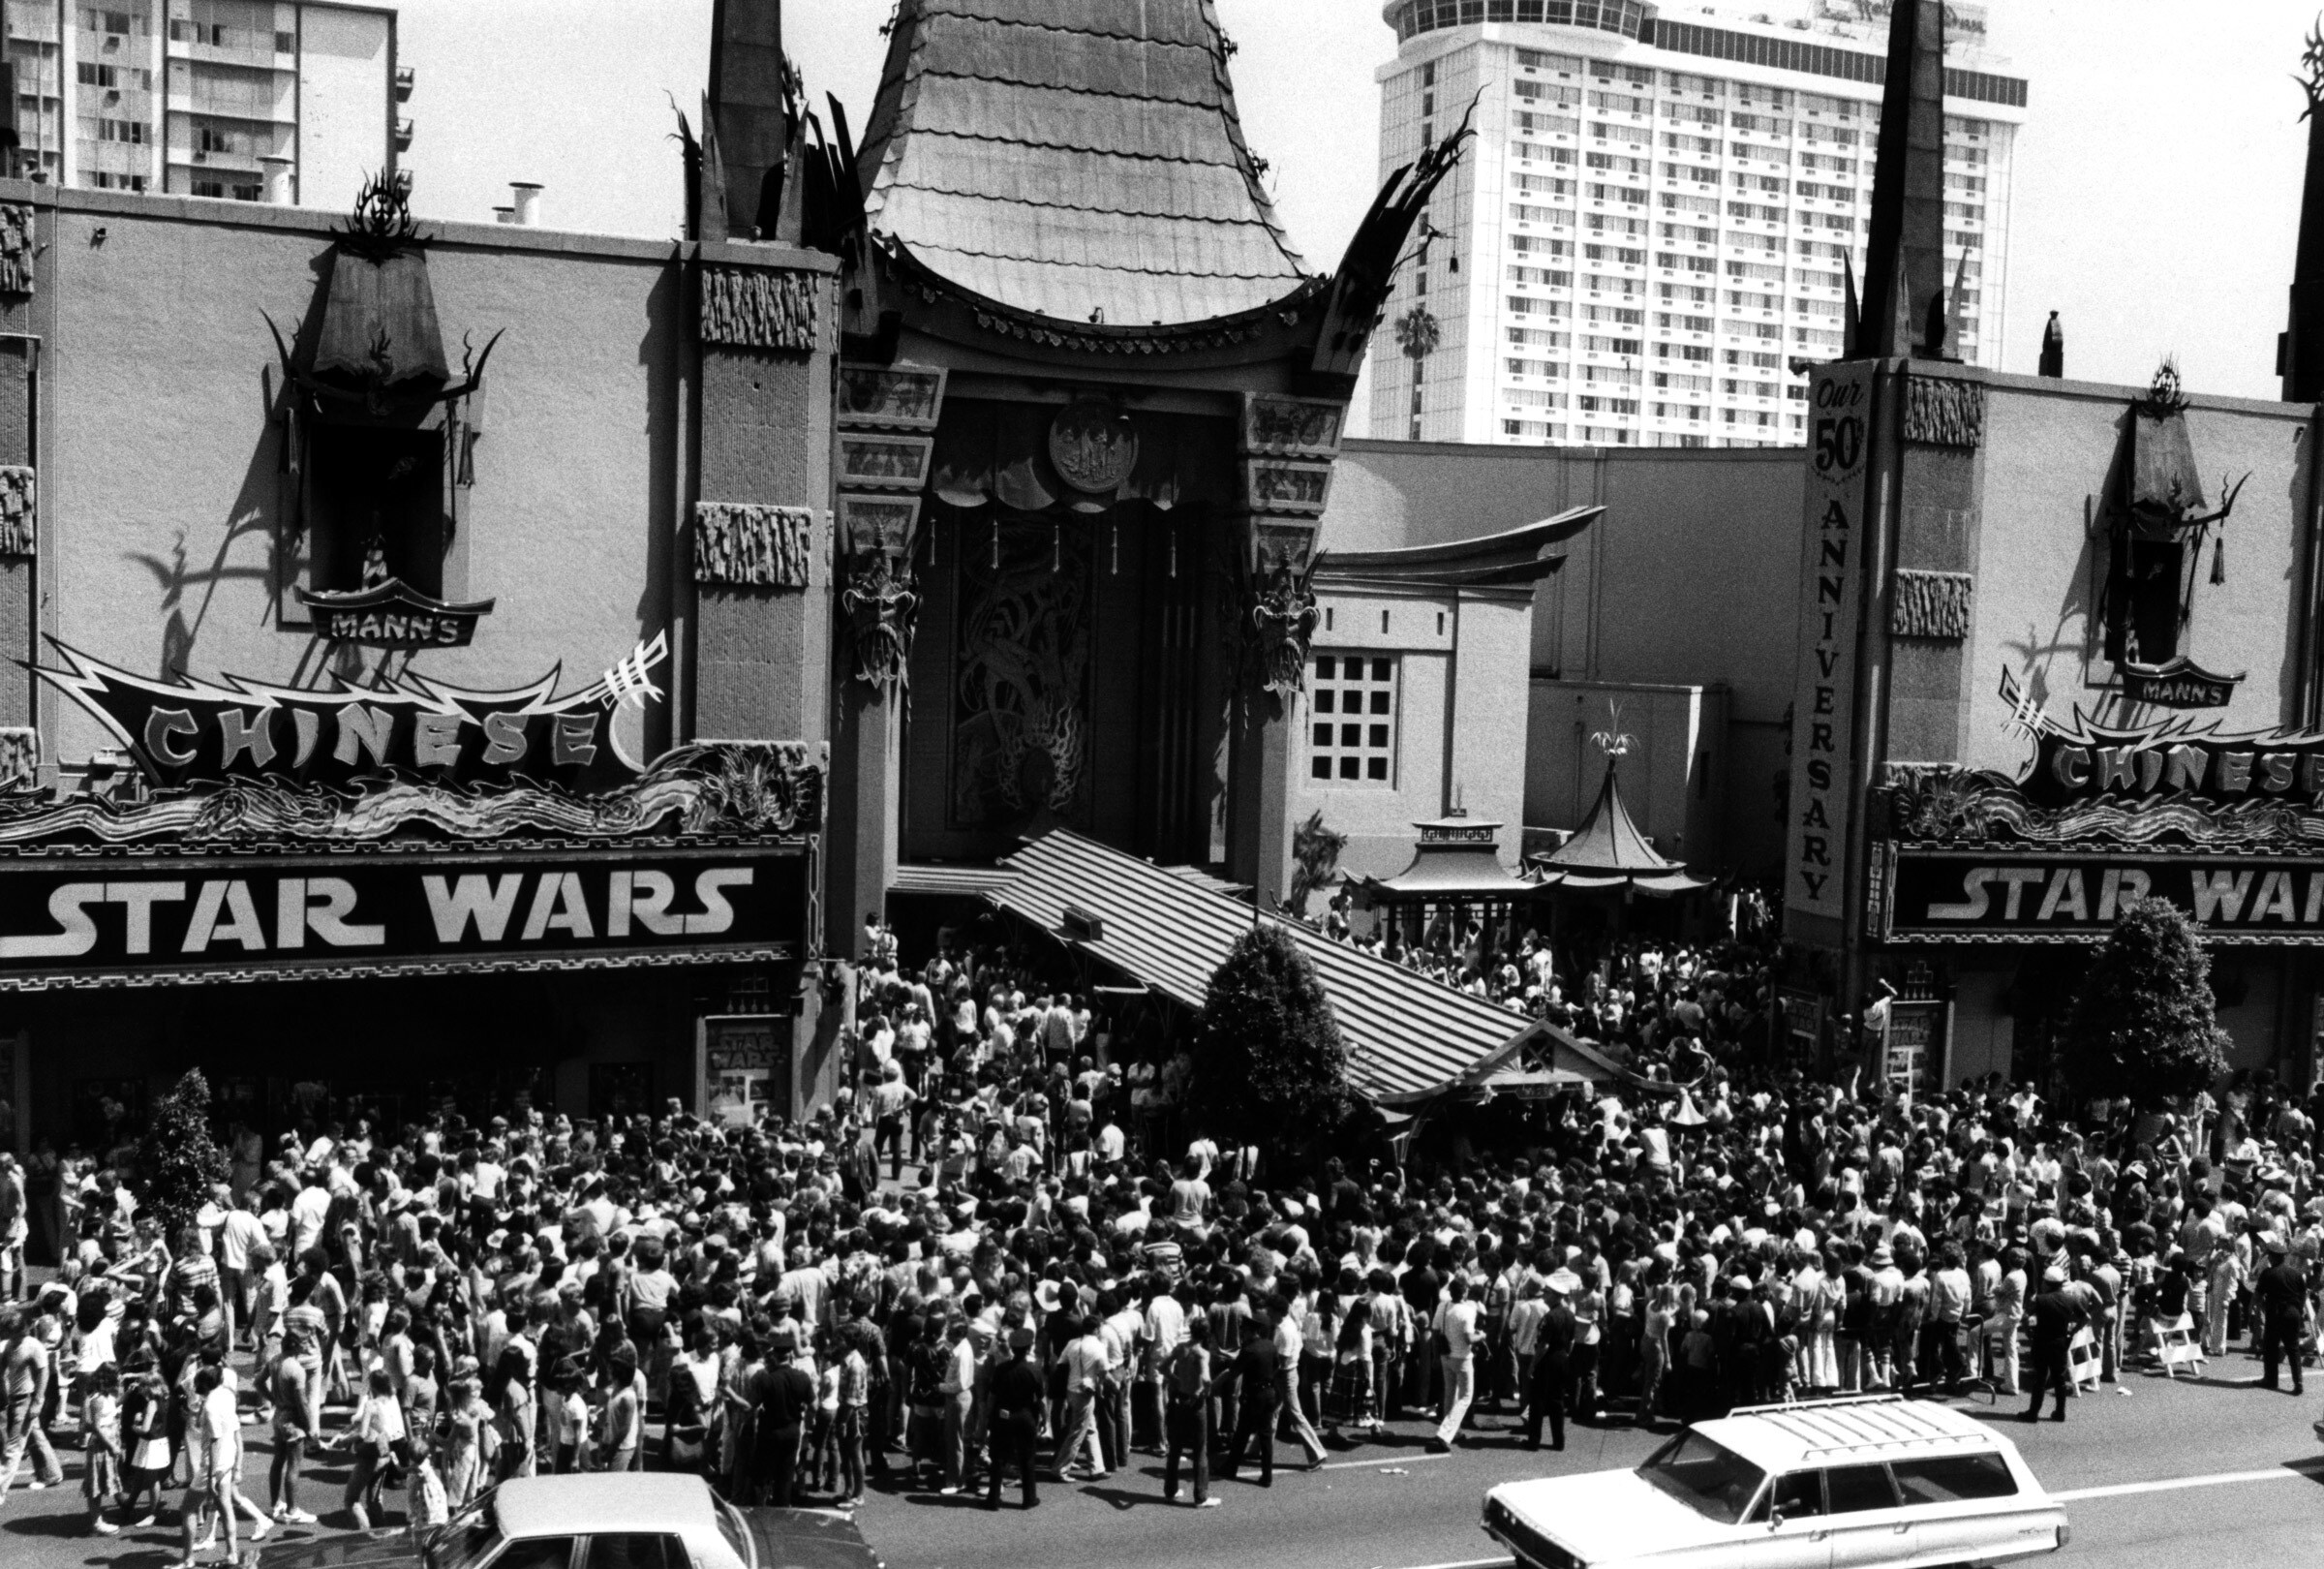 Star Wars at Grauman's Chinese Theater